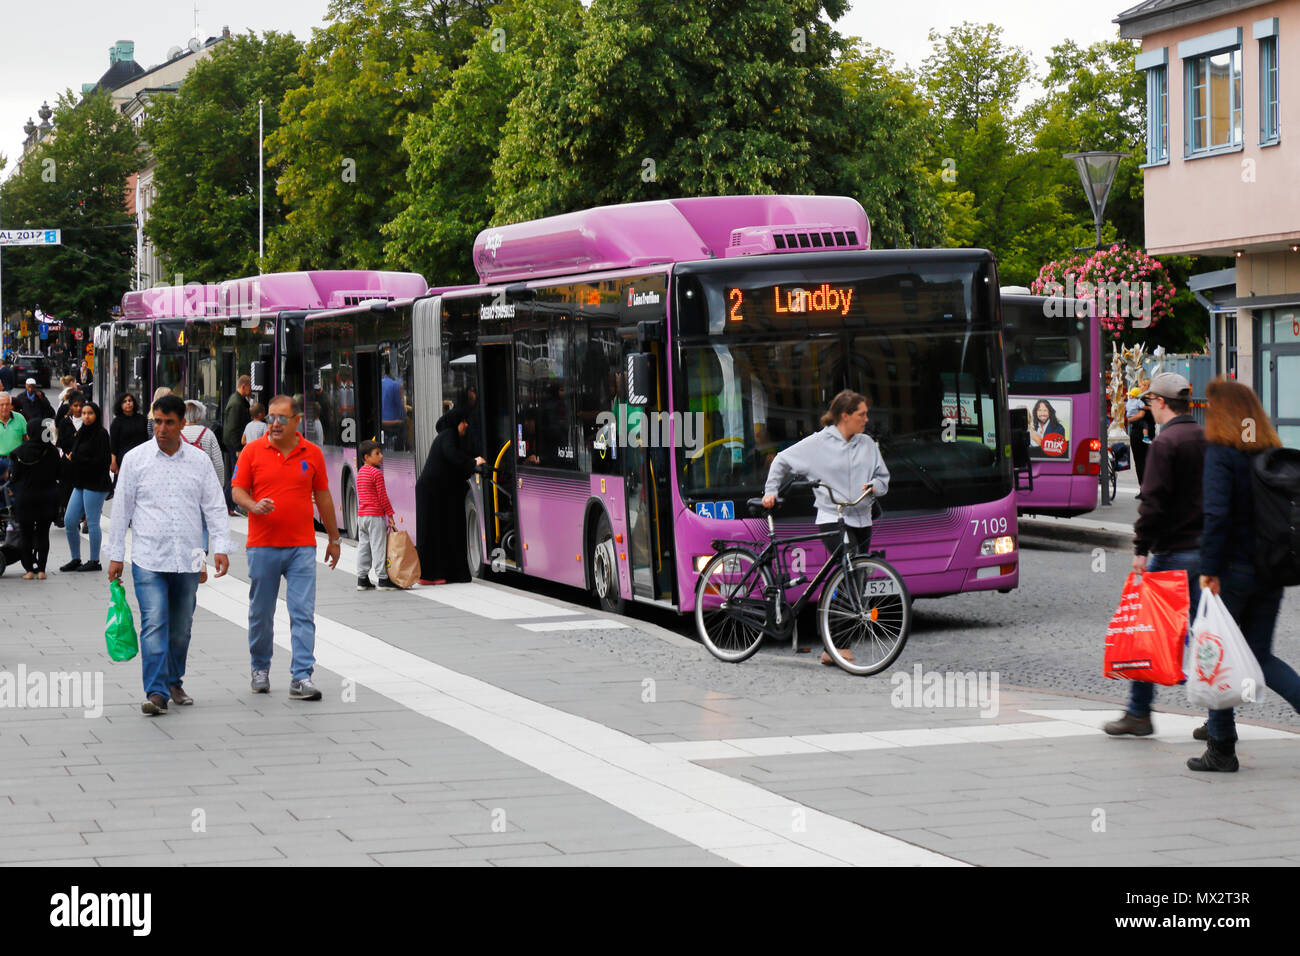 Orebro, Sweden - August 18, 2017: Violet colored public transportation city busses at stop Jarntorget in the city center. Stock Photo